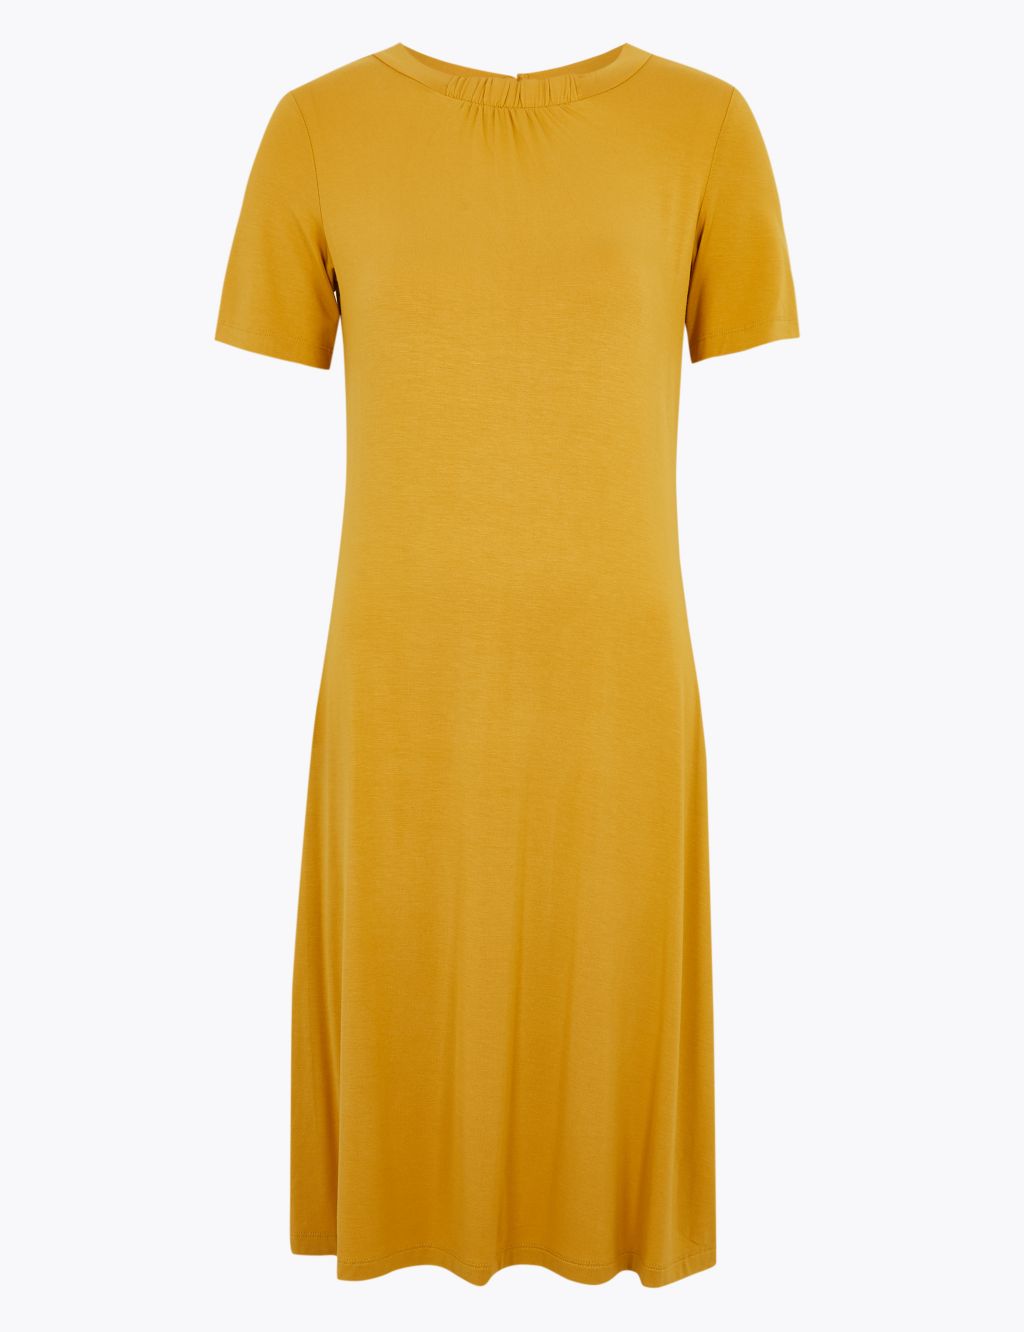 Jersey Knee Length Swing Dress | M&S Collection | M&S